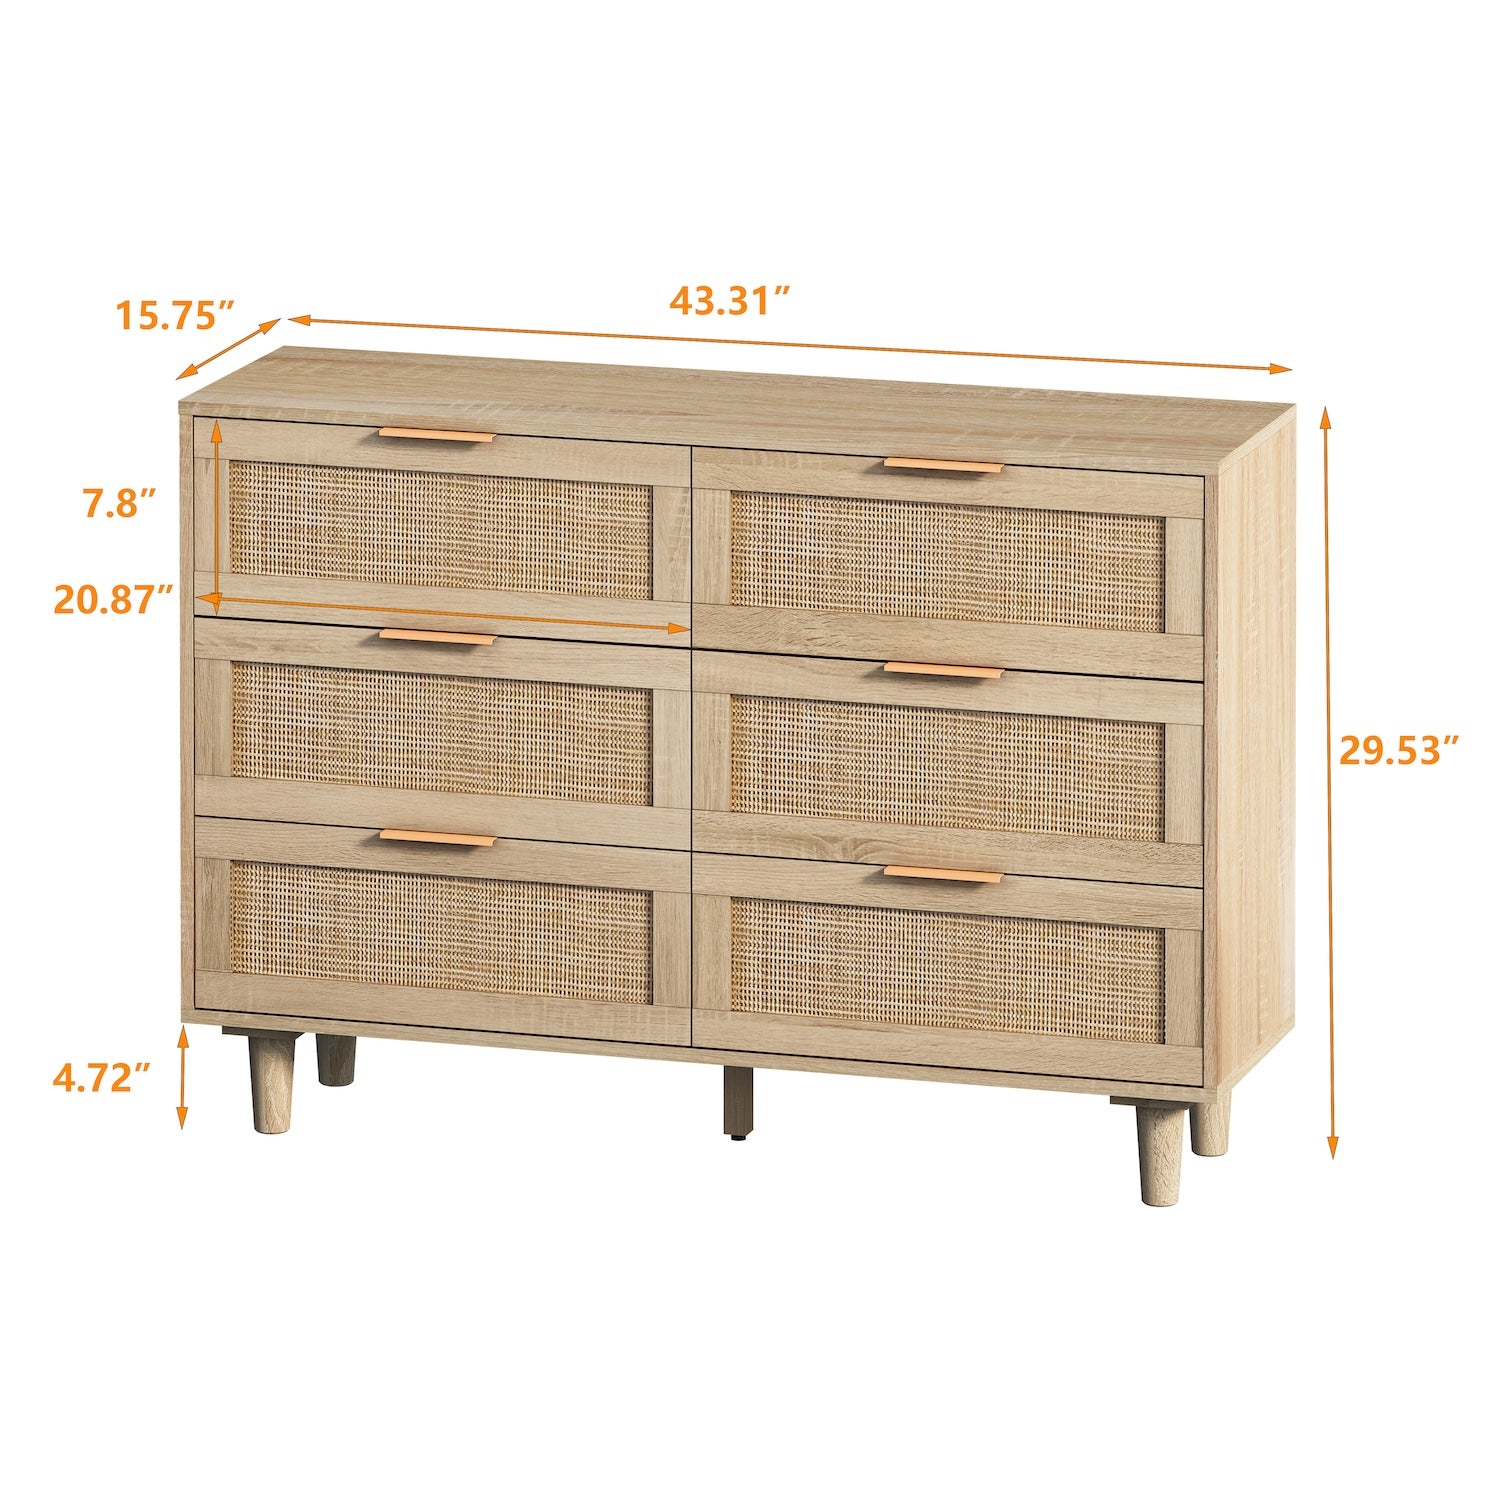 Danita 6-Drawer Cabinet in Natural Finish with Rattan Drawer Fronts